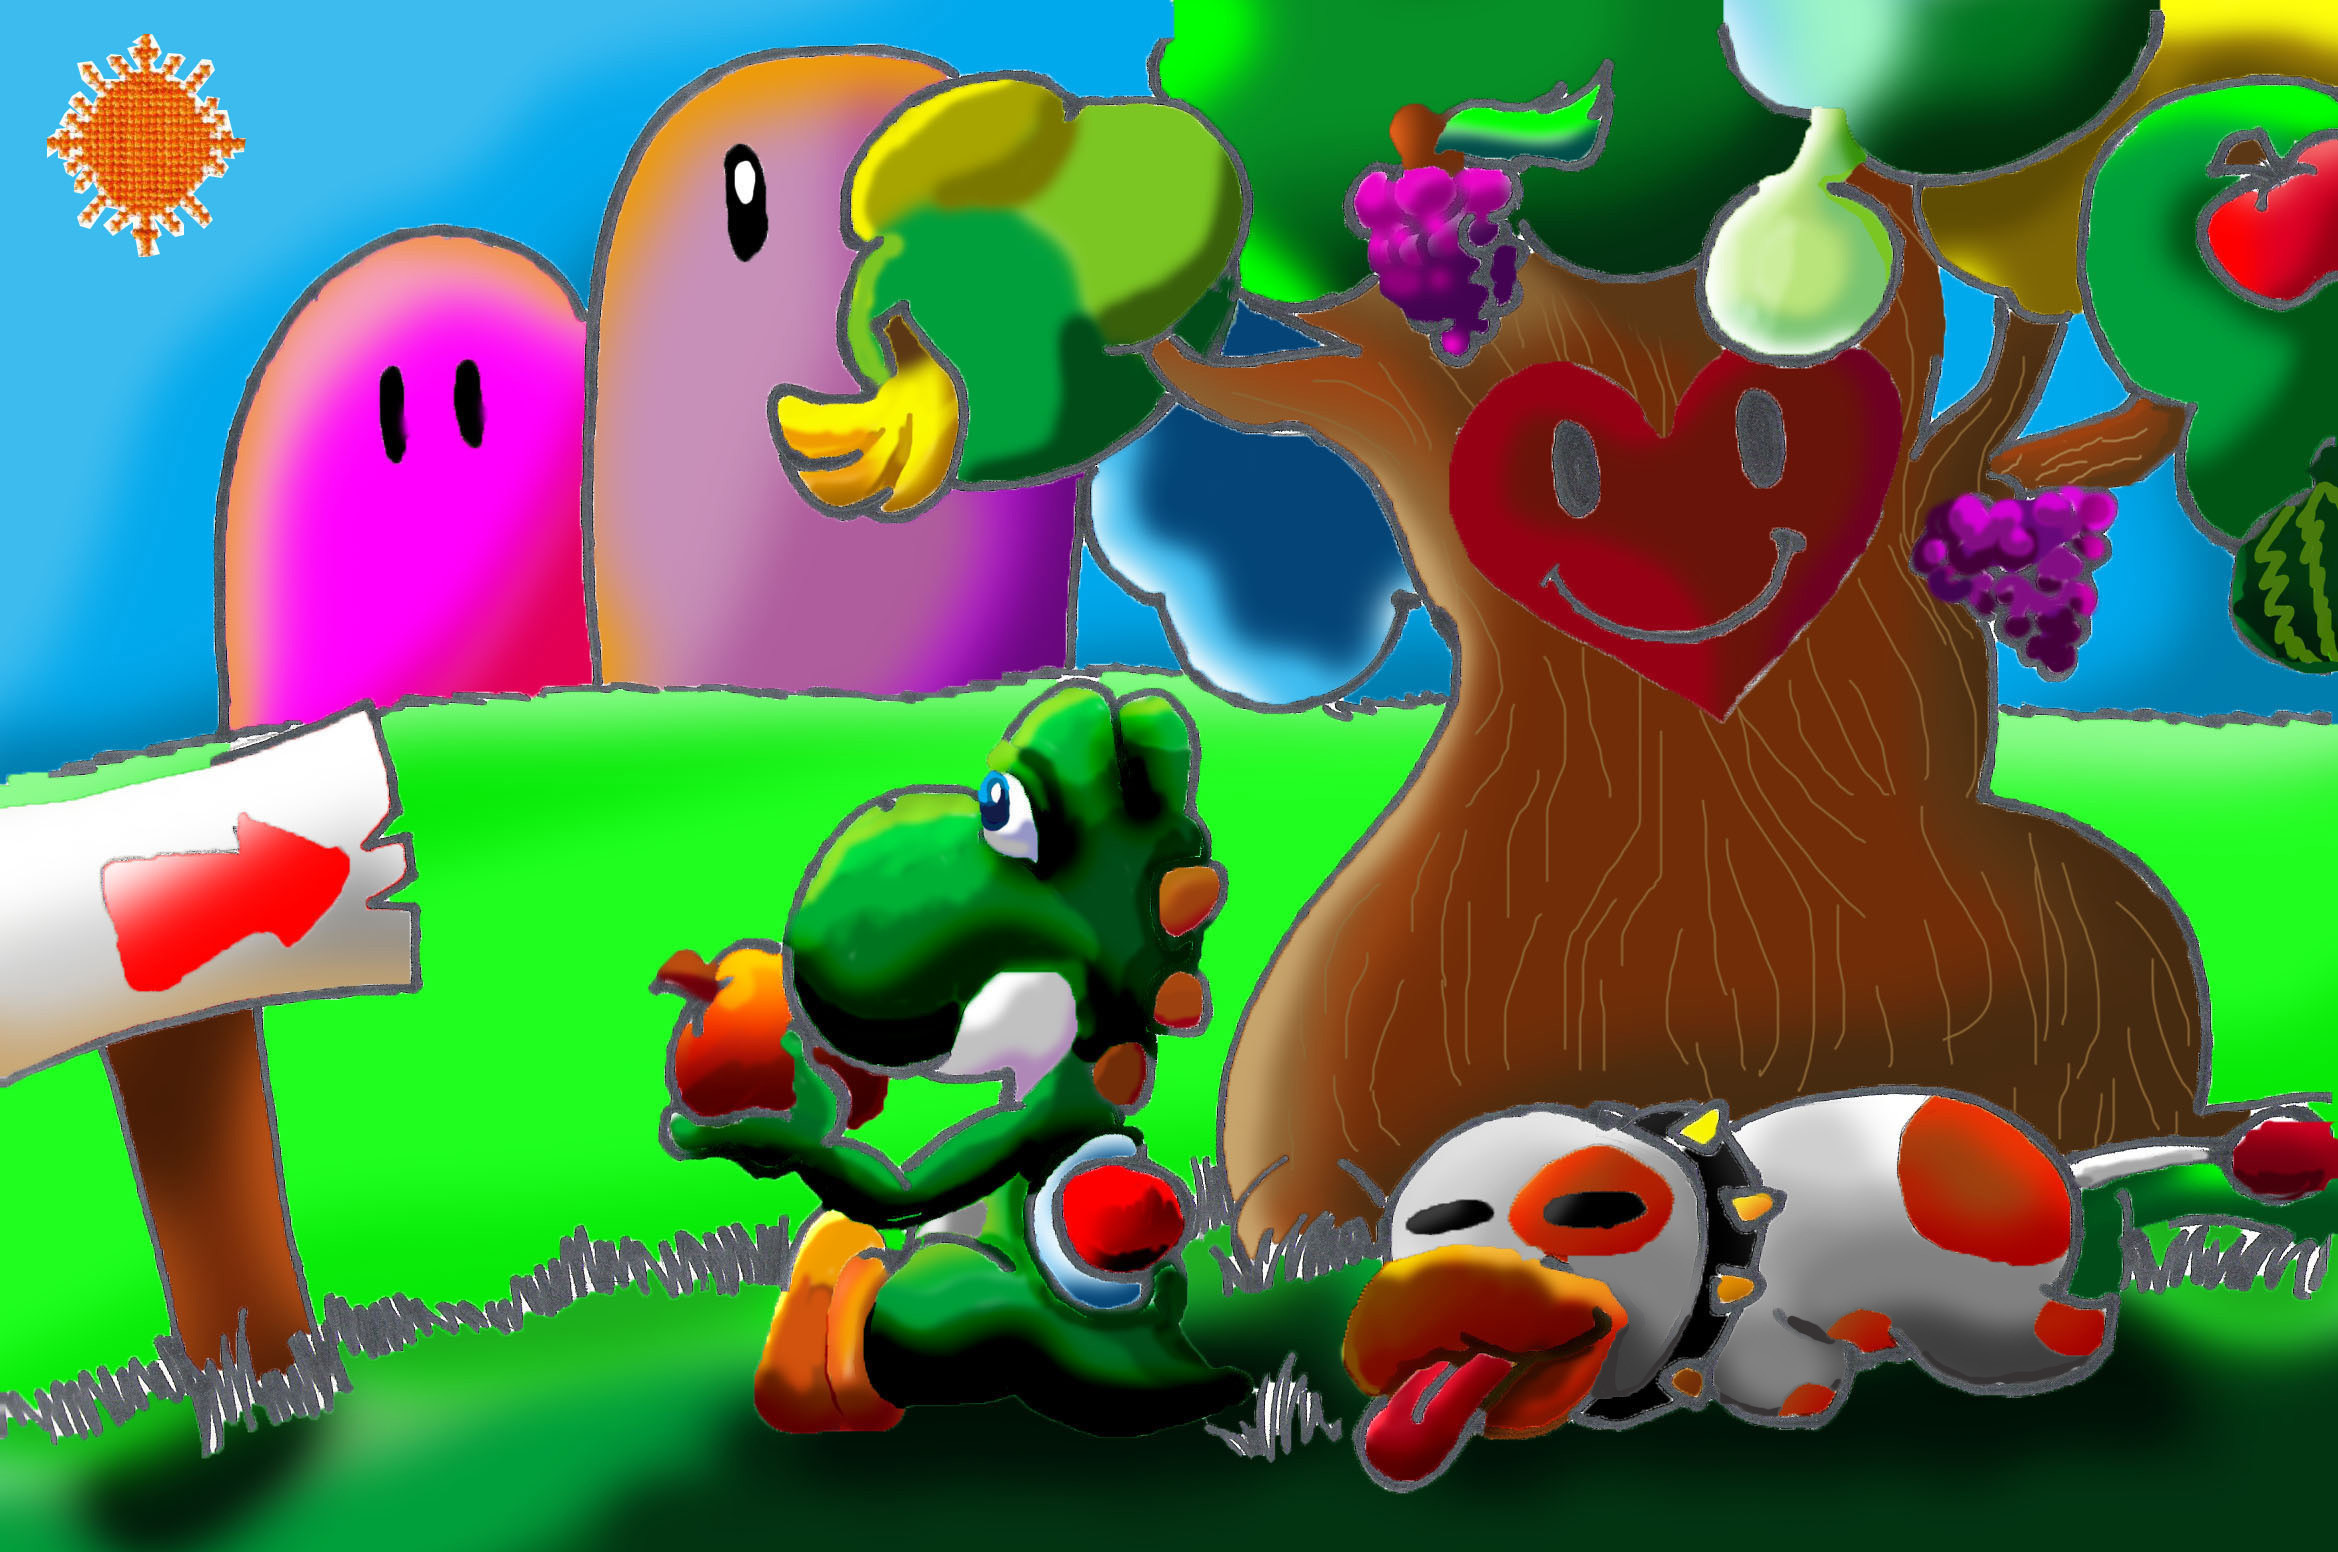 2338x1552 Yoshi images Yoshi's Happy tree HD wallpaper and background photos